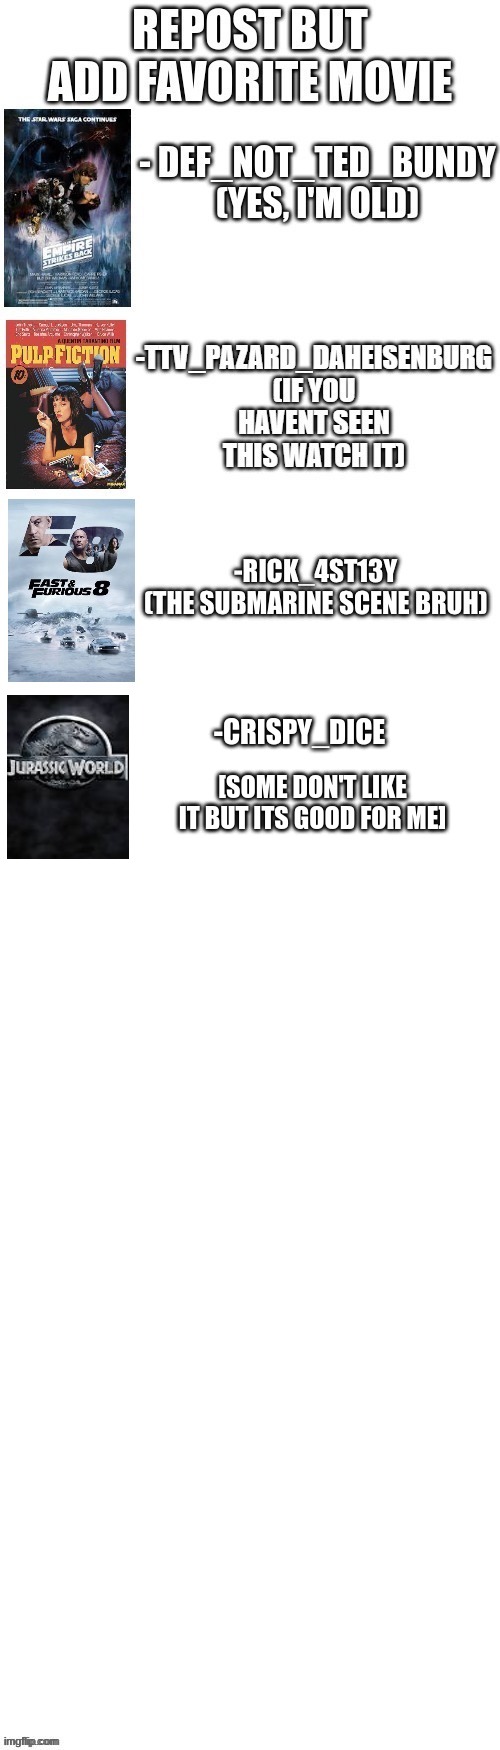 Why Not: Continue The Chain | -CRISPY_DICE; [SOME DON'T LIKE IT BUT ITS GOOD FOR ME] | image tagged in repost,notgif,memes,dank memes,e | made w/ Imgflip meme maker